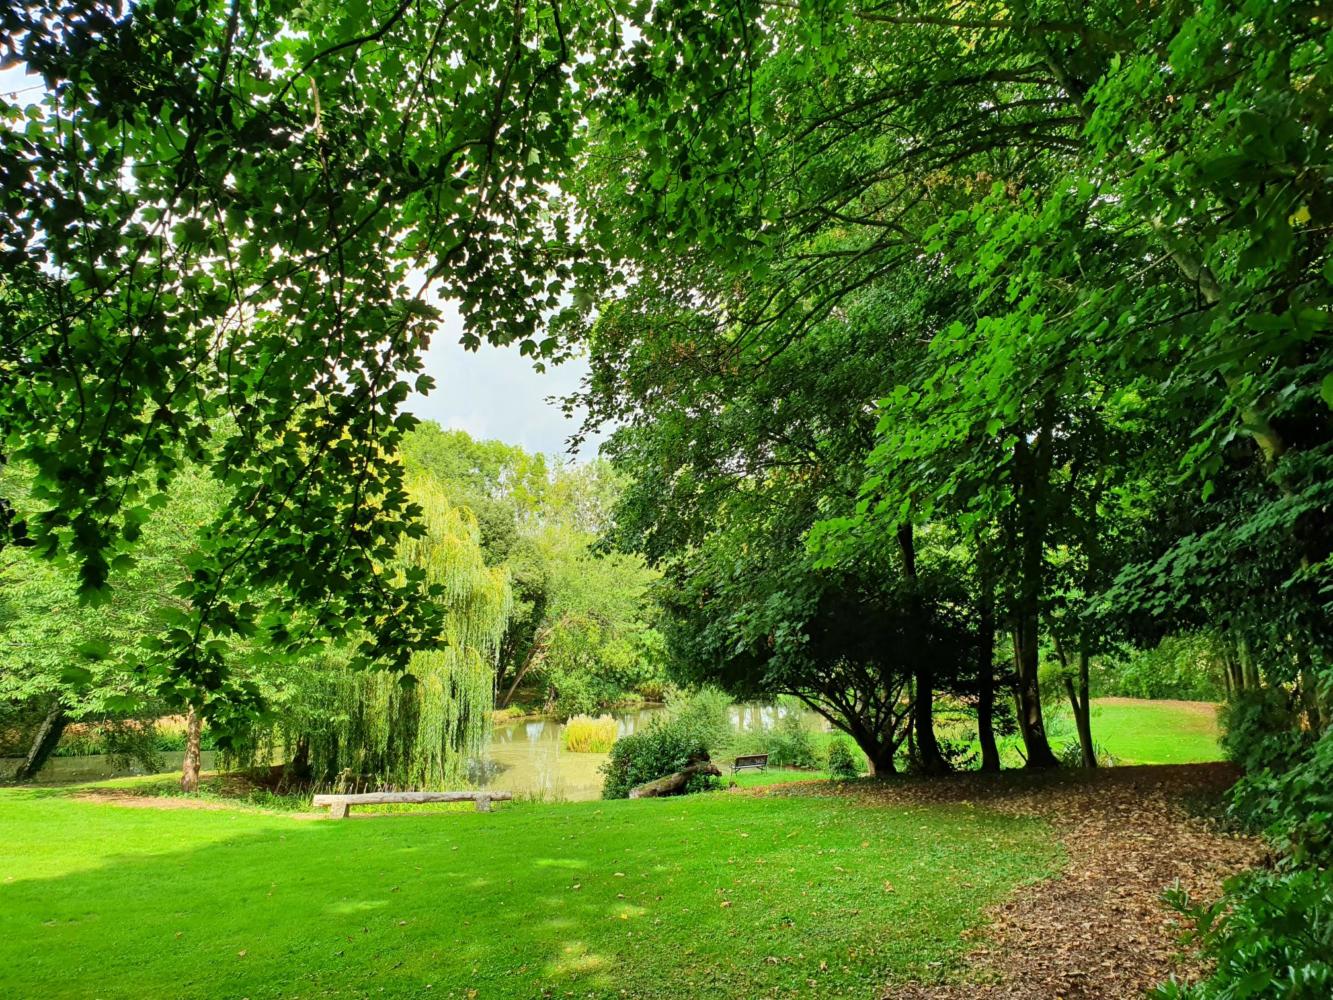 Very green grass and trees nearing the lake area of the Cottages grounds with a bench and willow tree in the background overlooking the Lake.